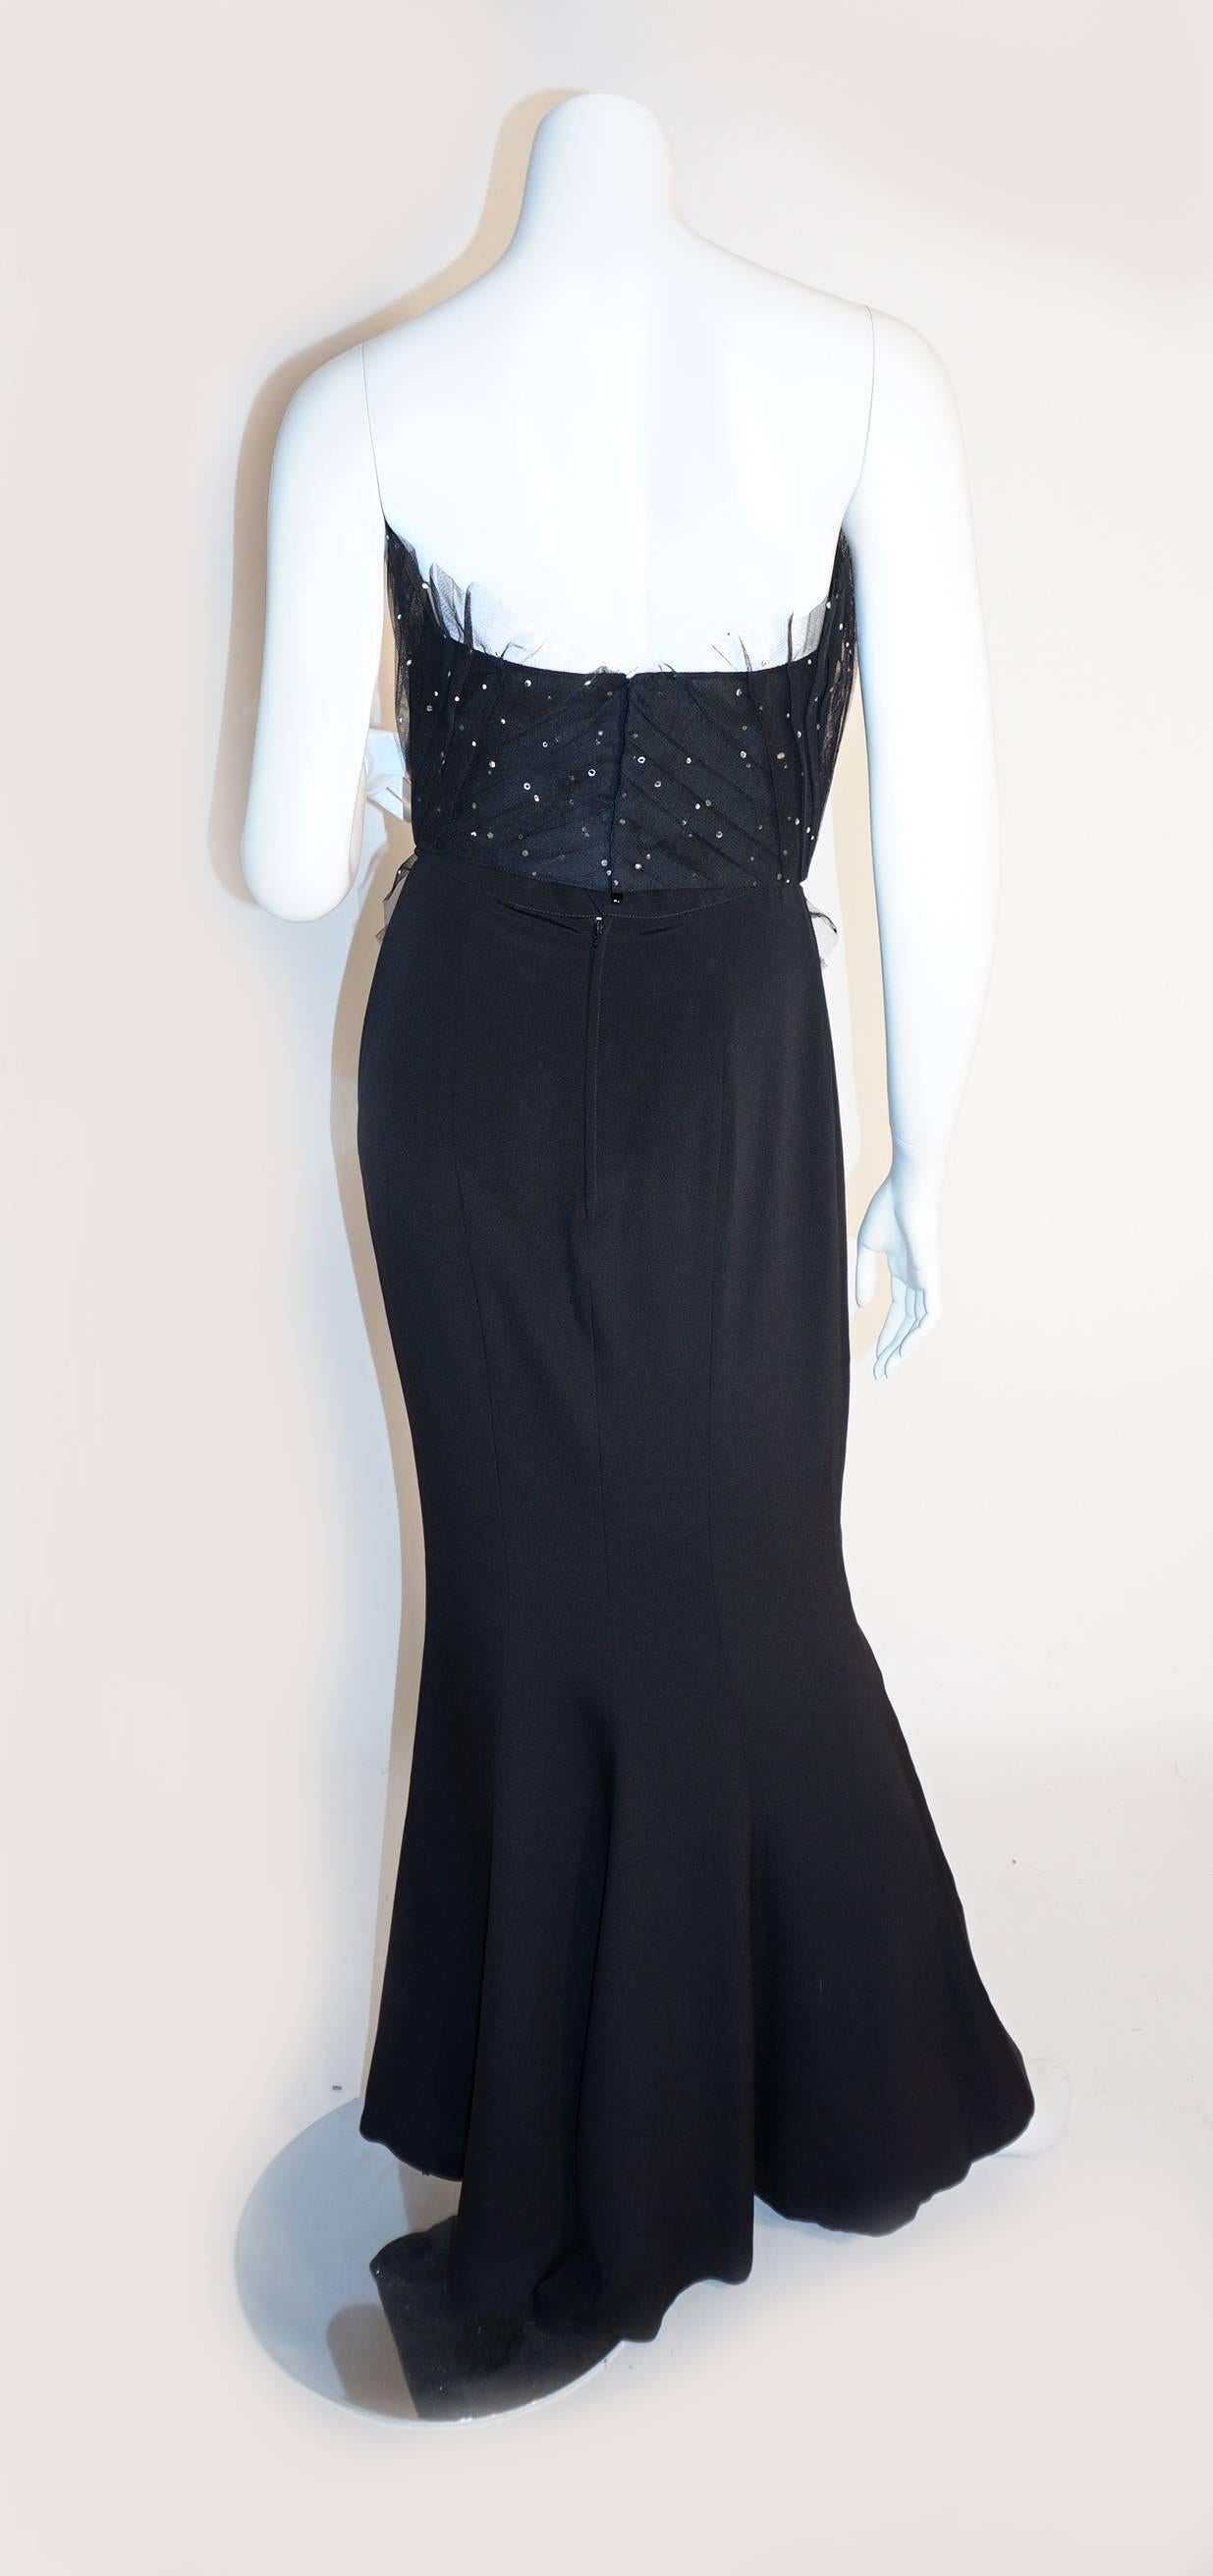 Black Thierry Mugler Rare Embellished Bustier with Skirt For Sale